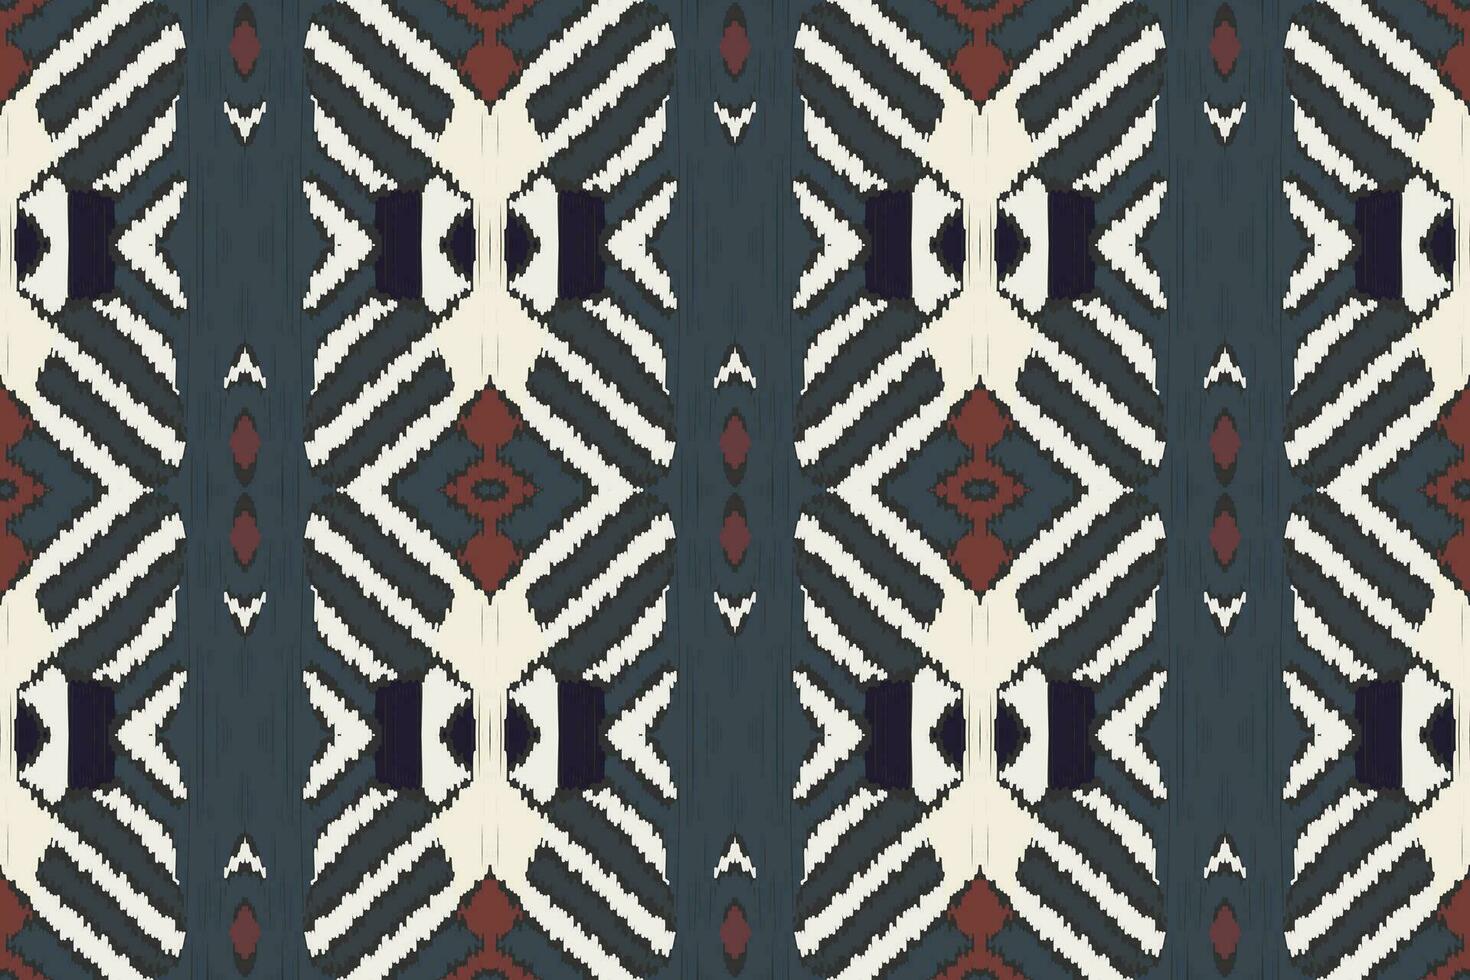 Ikat Fabric Paisley Embroidery Background. Ikat Fabric Geometric Ethnic Oriental Pattern Traditional. Ikat Aztec Style Abstract Design for Print Texture,fabric,saree,sari,carpet. vector